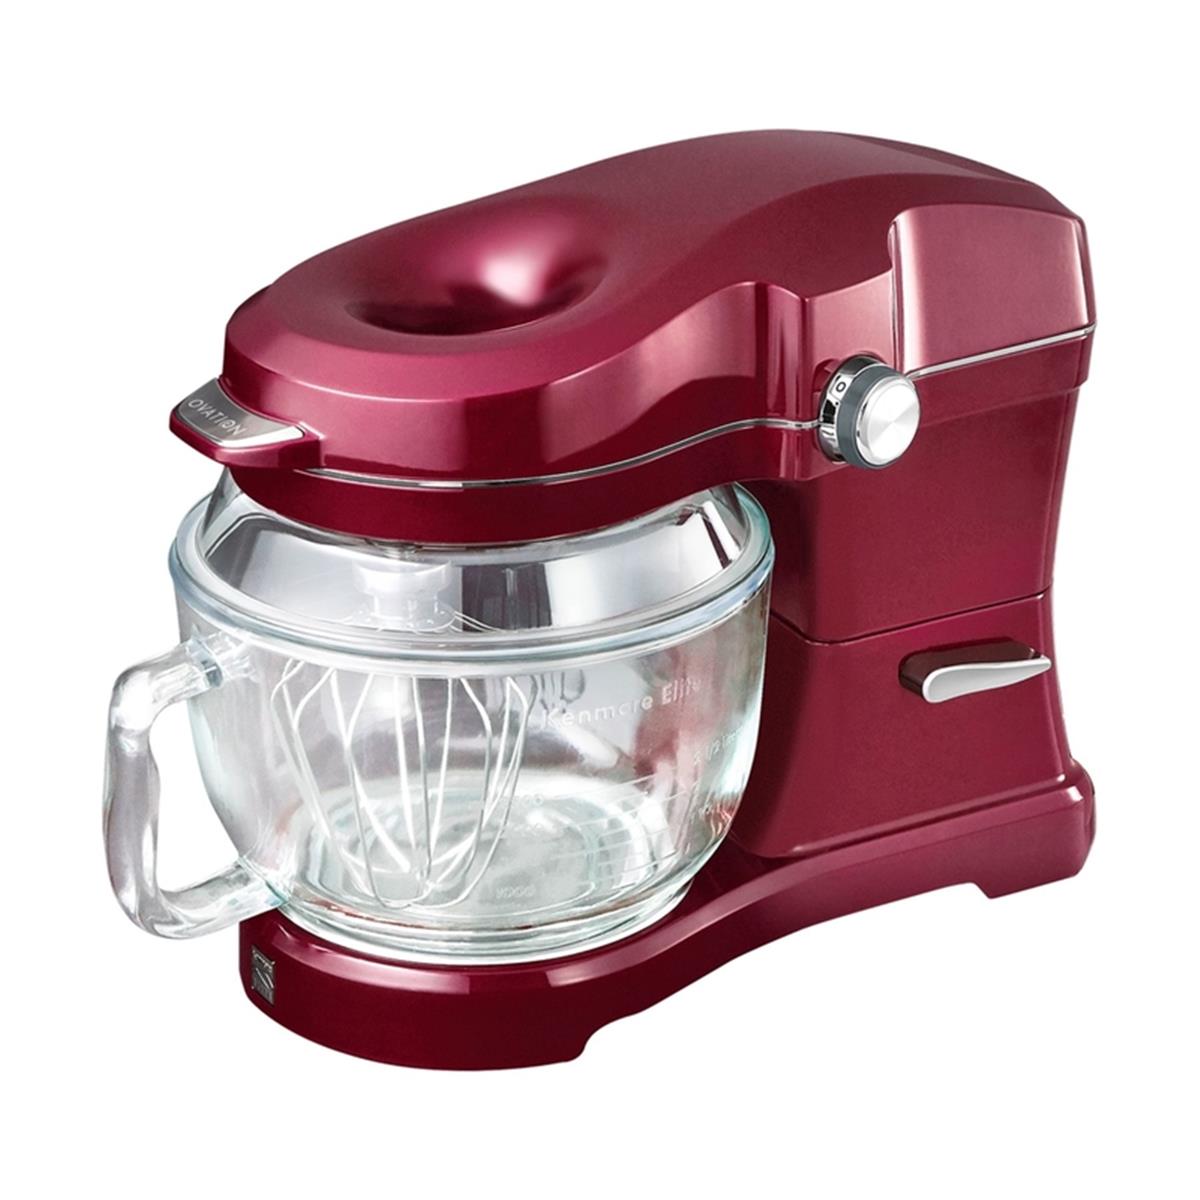 Picture of Kenmore 6037639 5 qt. Elite Burgundy 10 Speed Stand Mixer